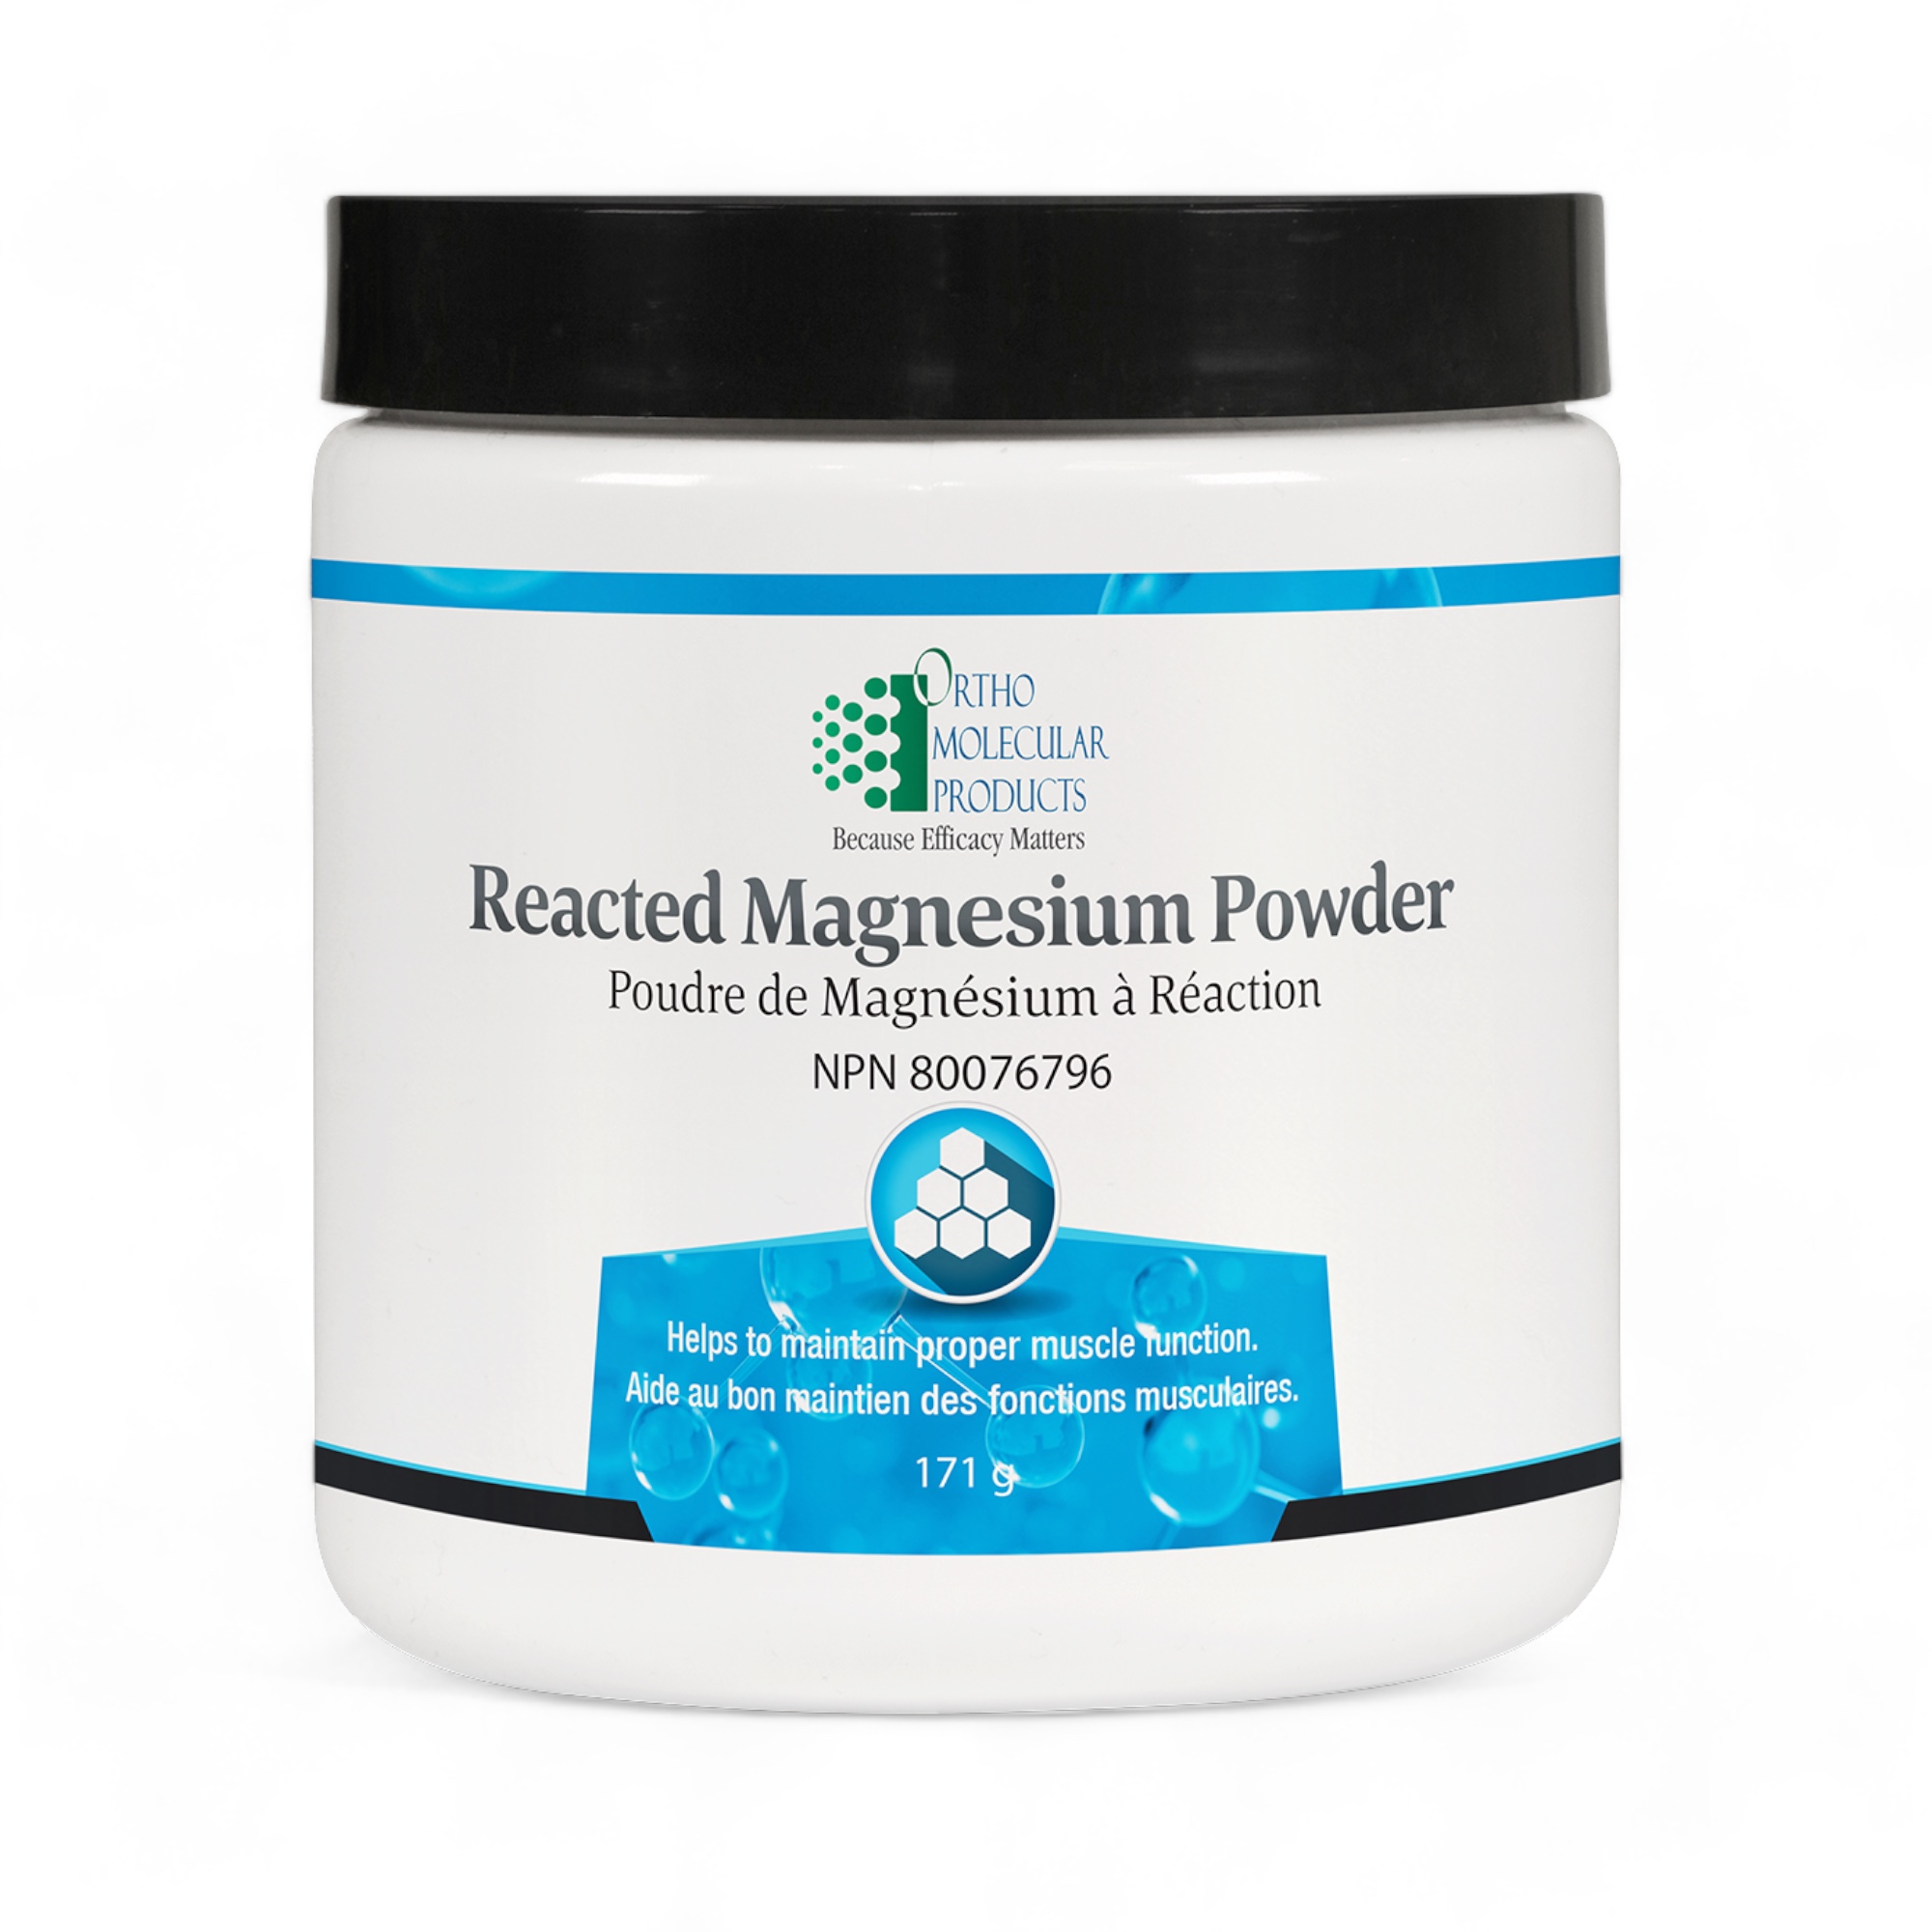 Reacted Magnesium poudre 30 Portions Ortho Molecular Products